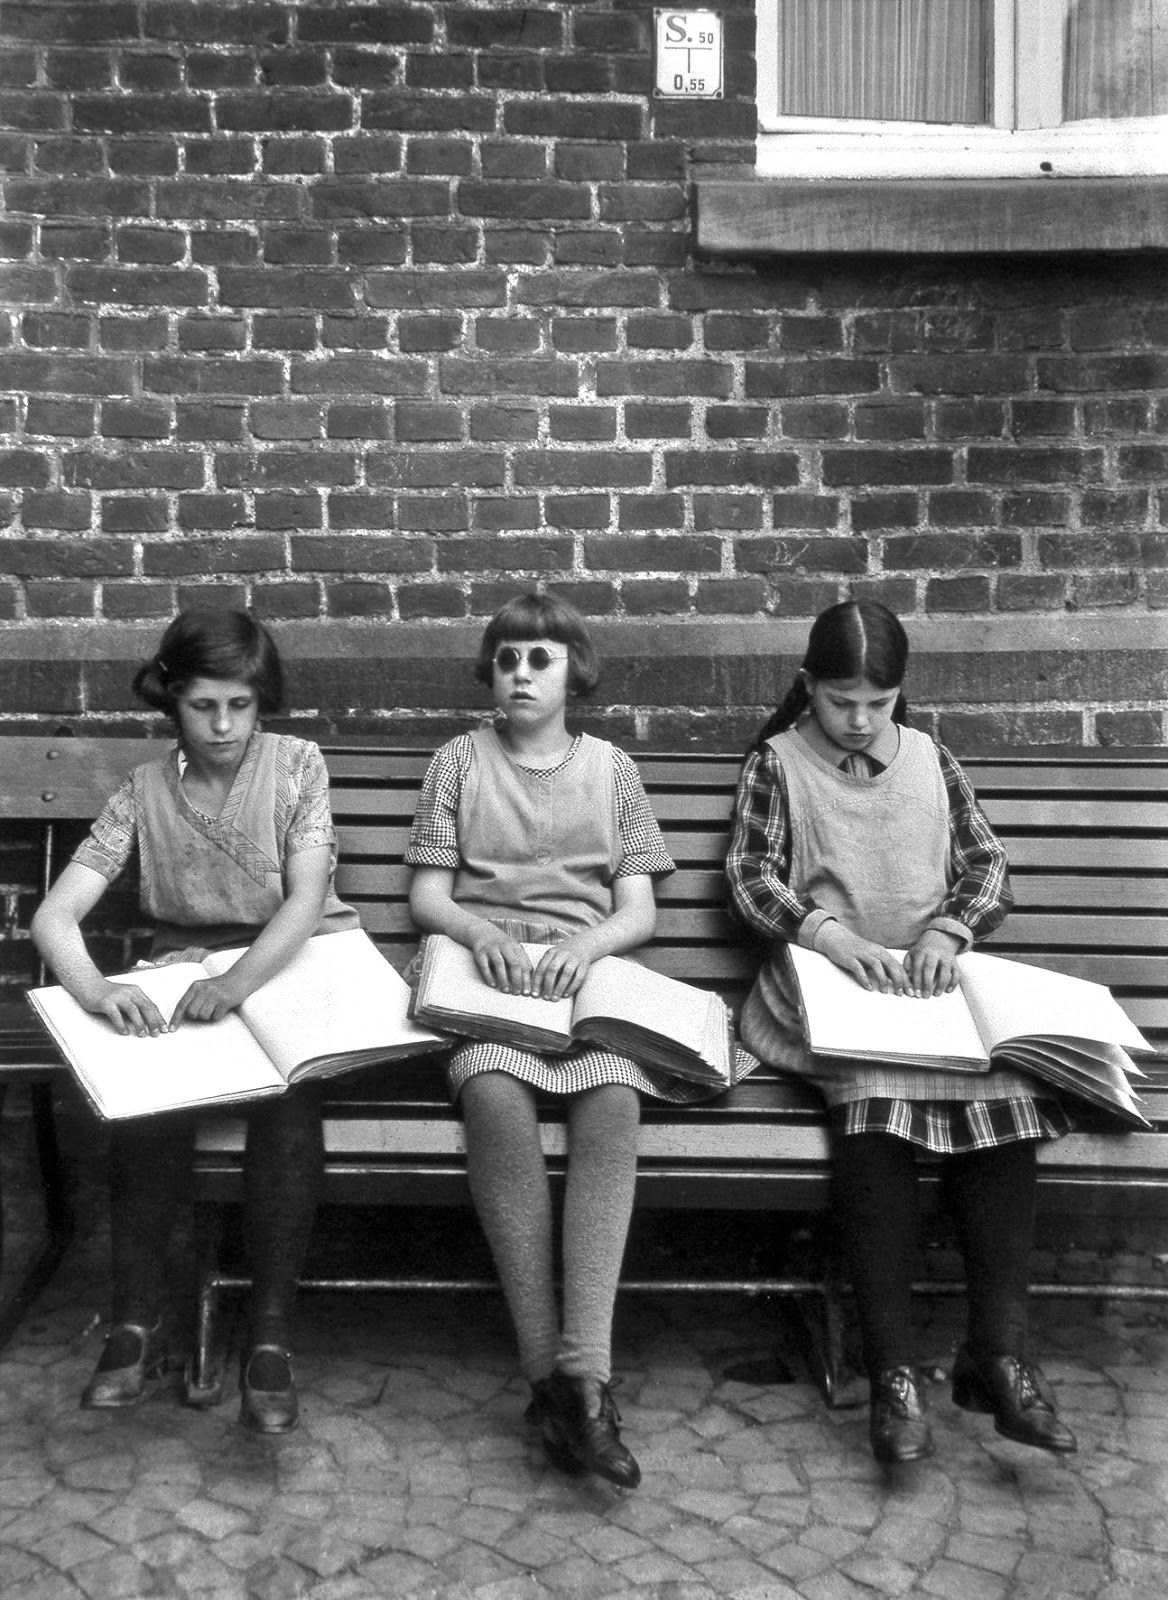 Three girls are sitting on a bench, reading from their Braille books. The image is in black and white